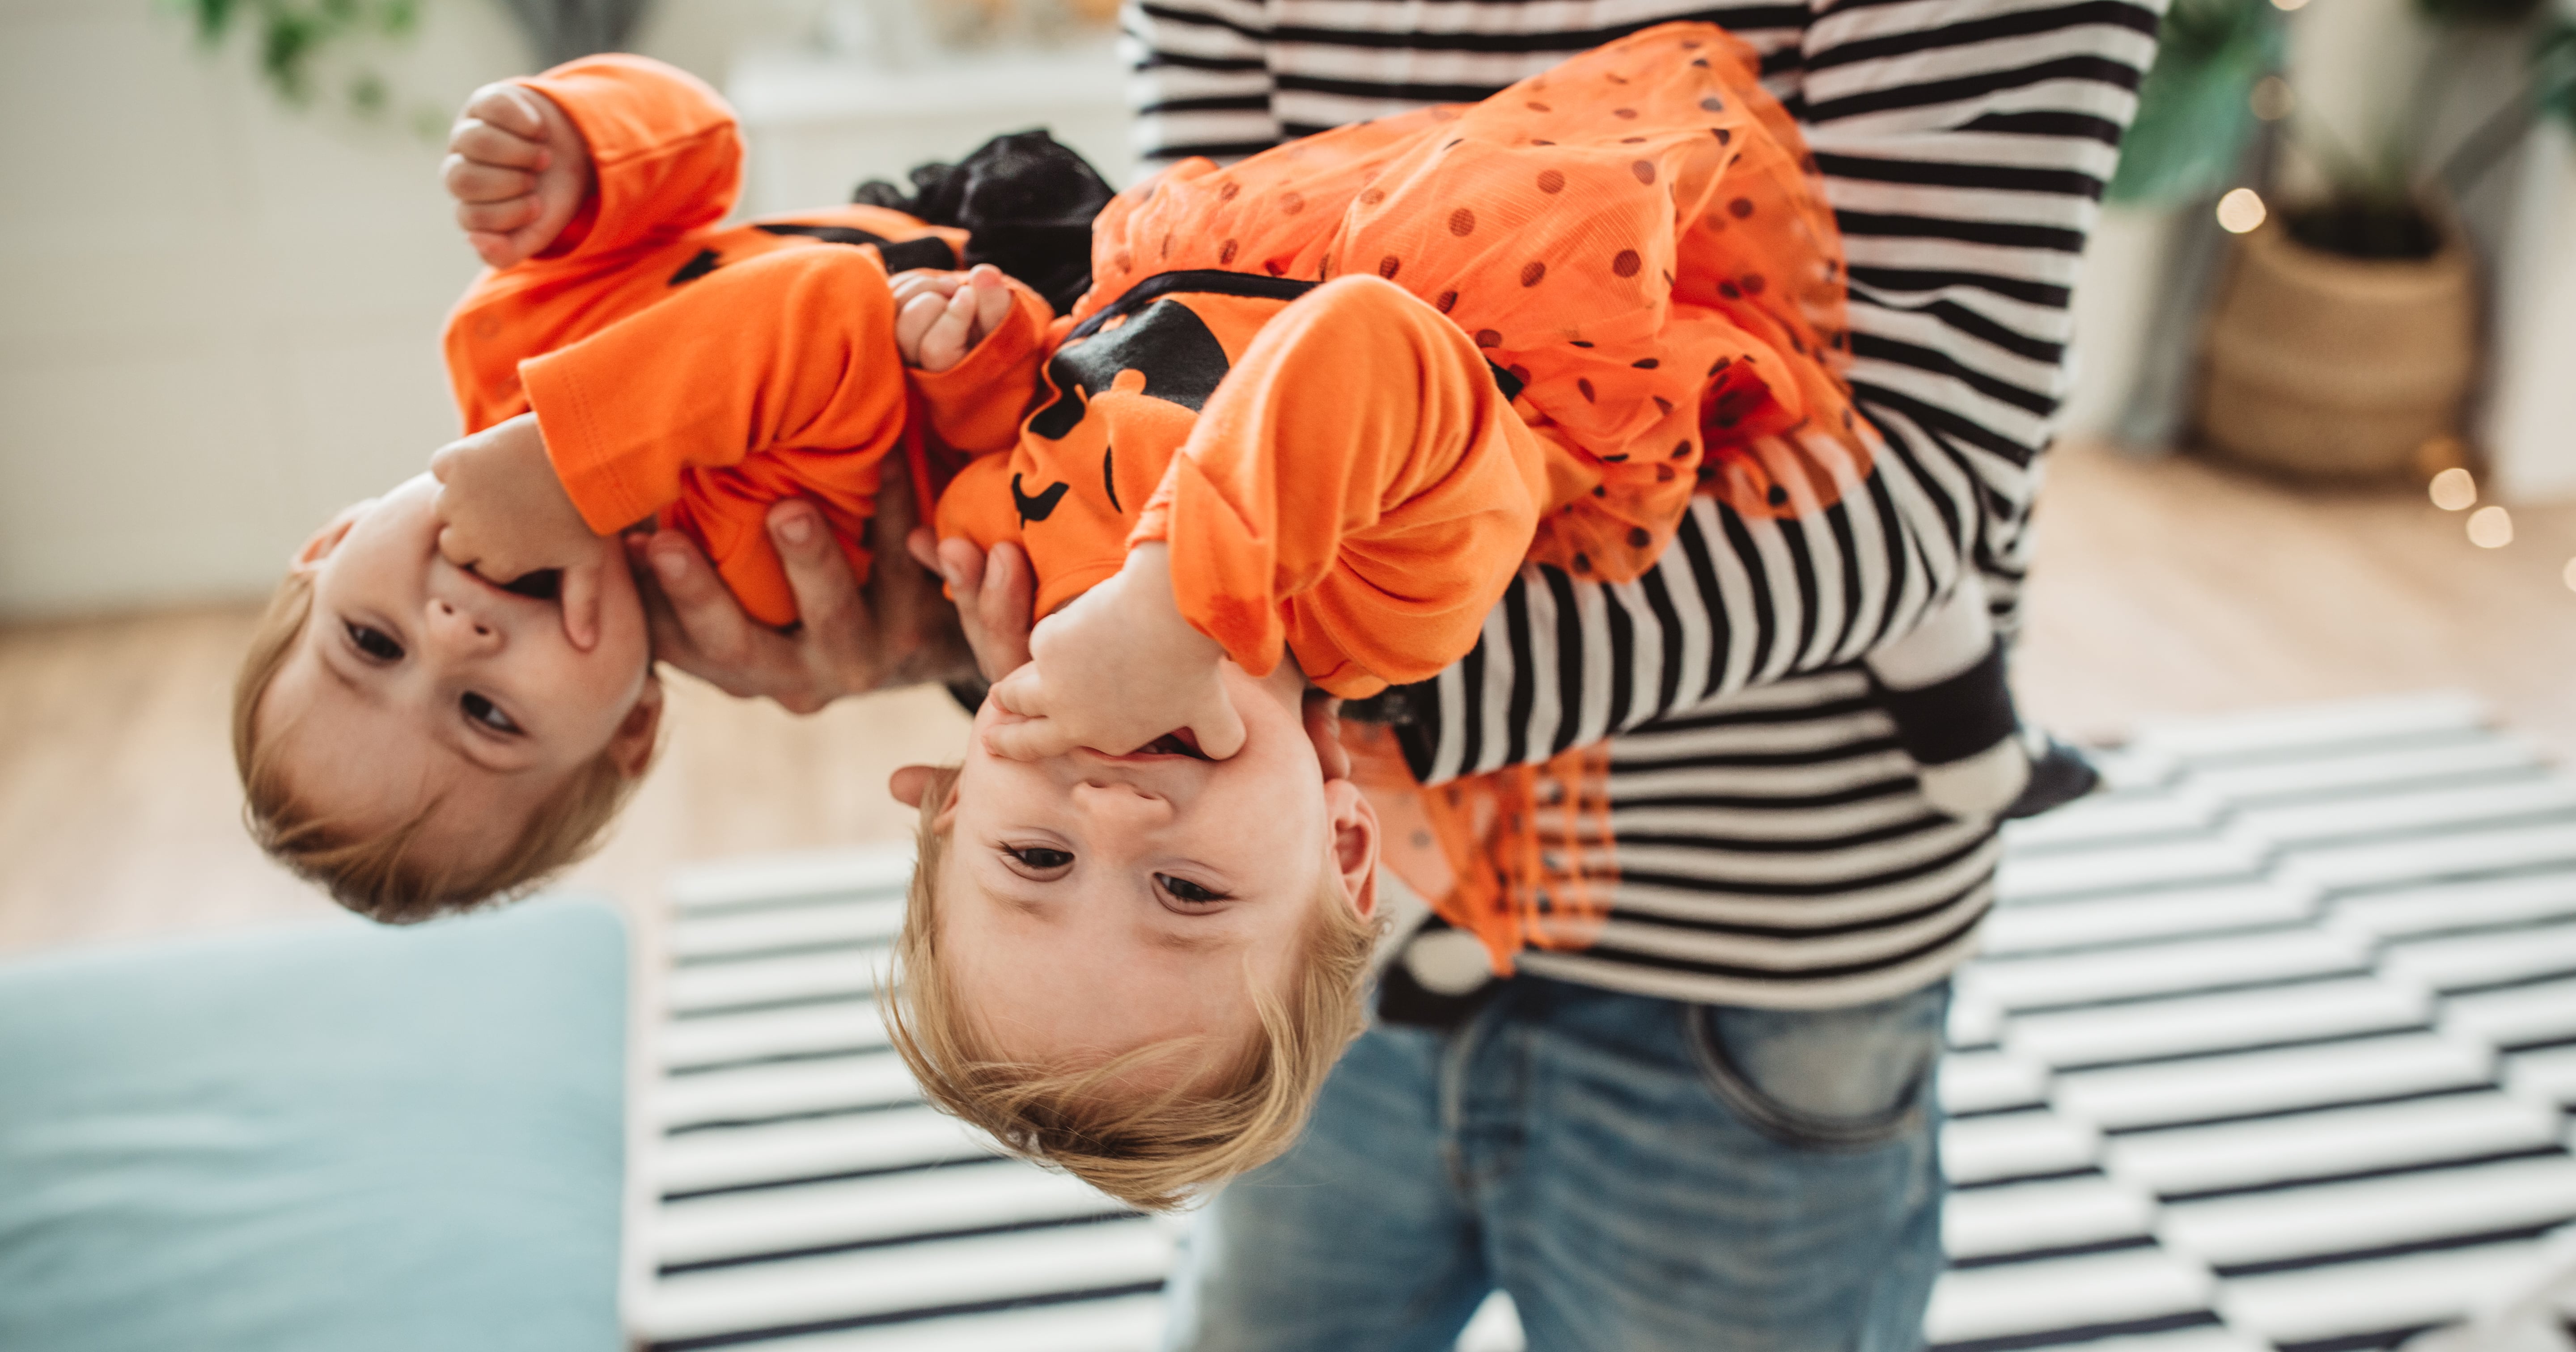 11 Halloween Costume Ideas For Twins and Triplets